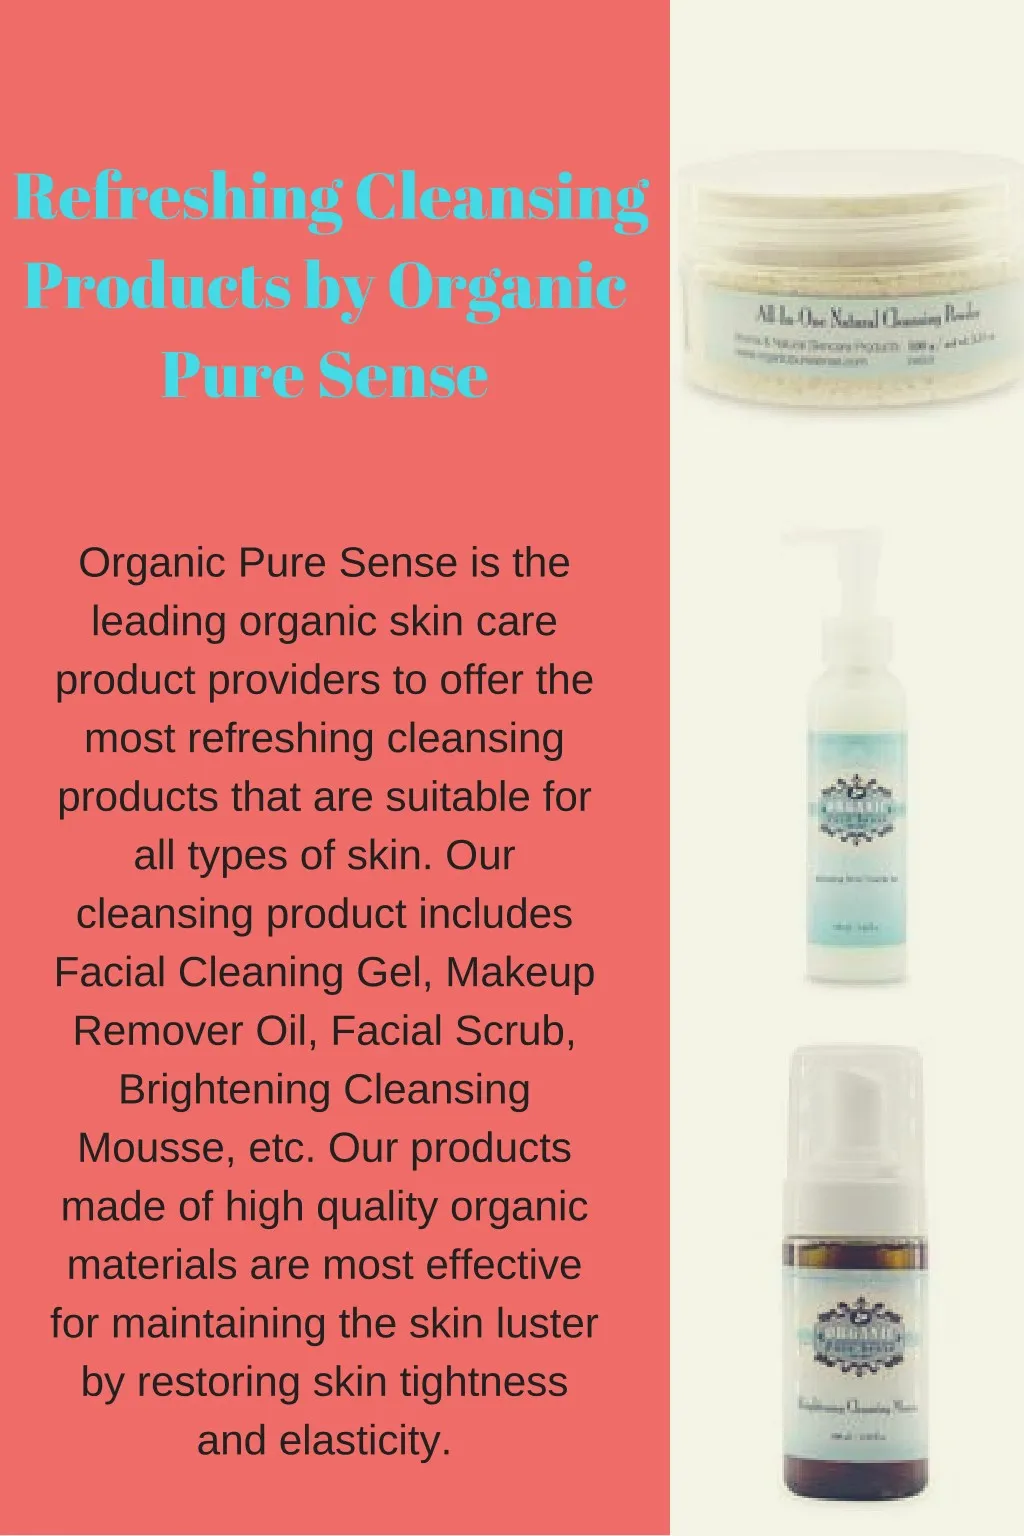 refreshing cleansing products by organic pure